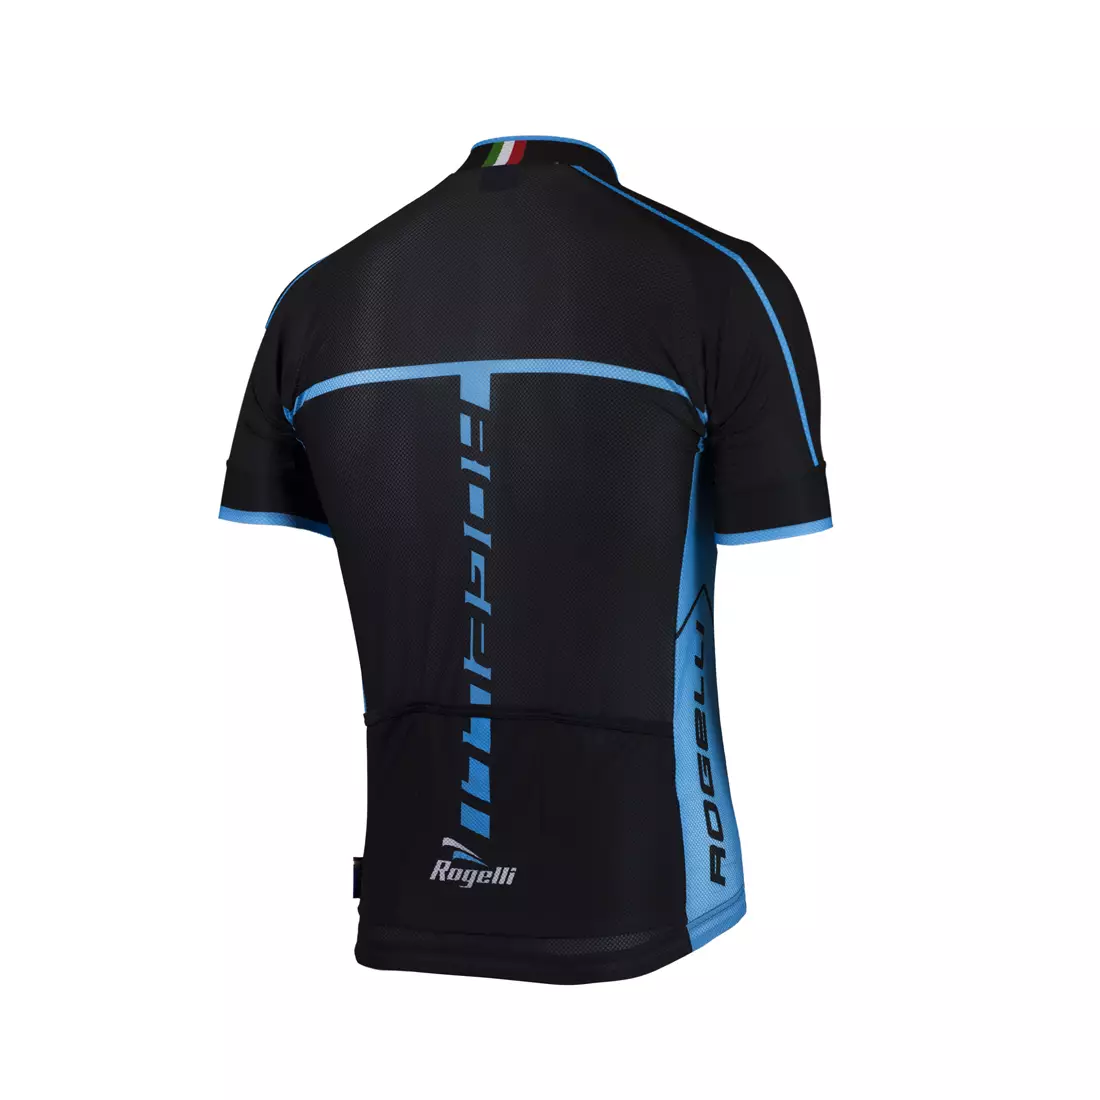 ROGELLI UMBRIA 2.0 men's cycling jersey, black and blue